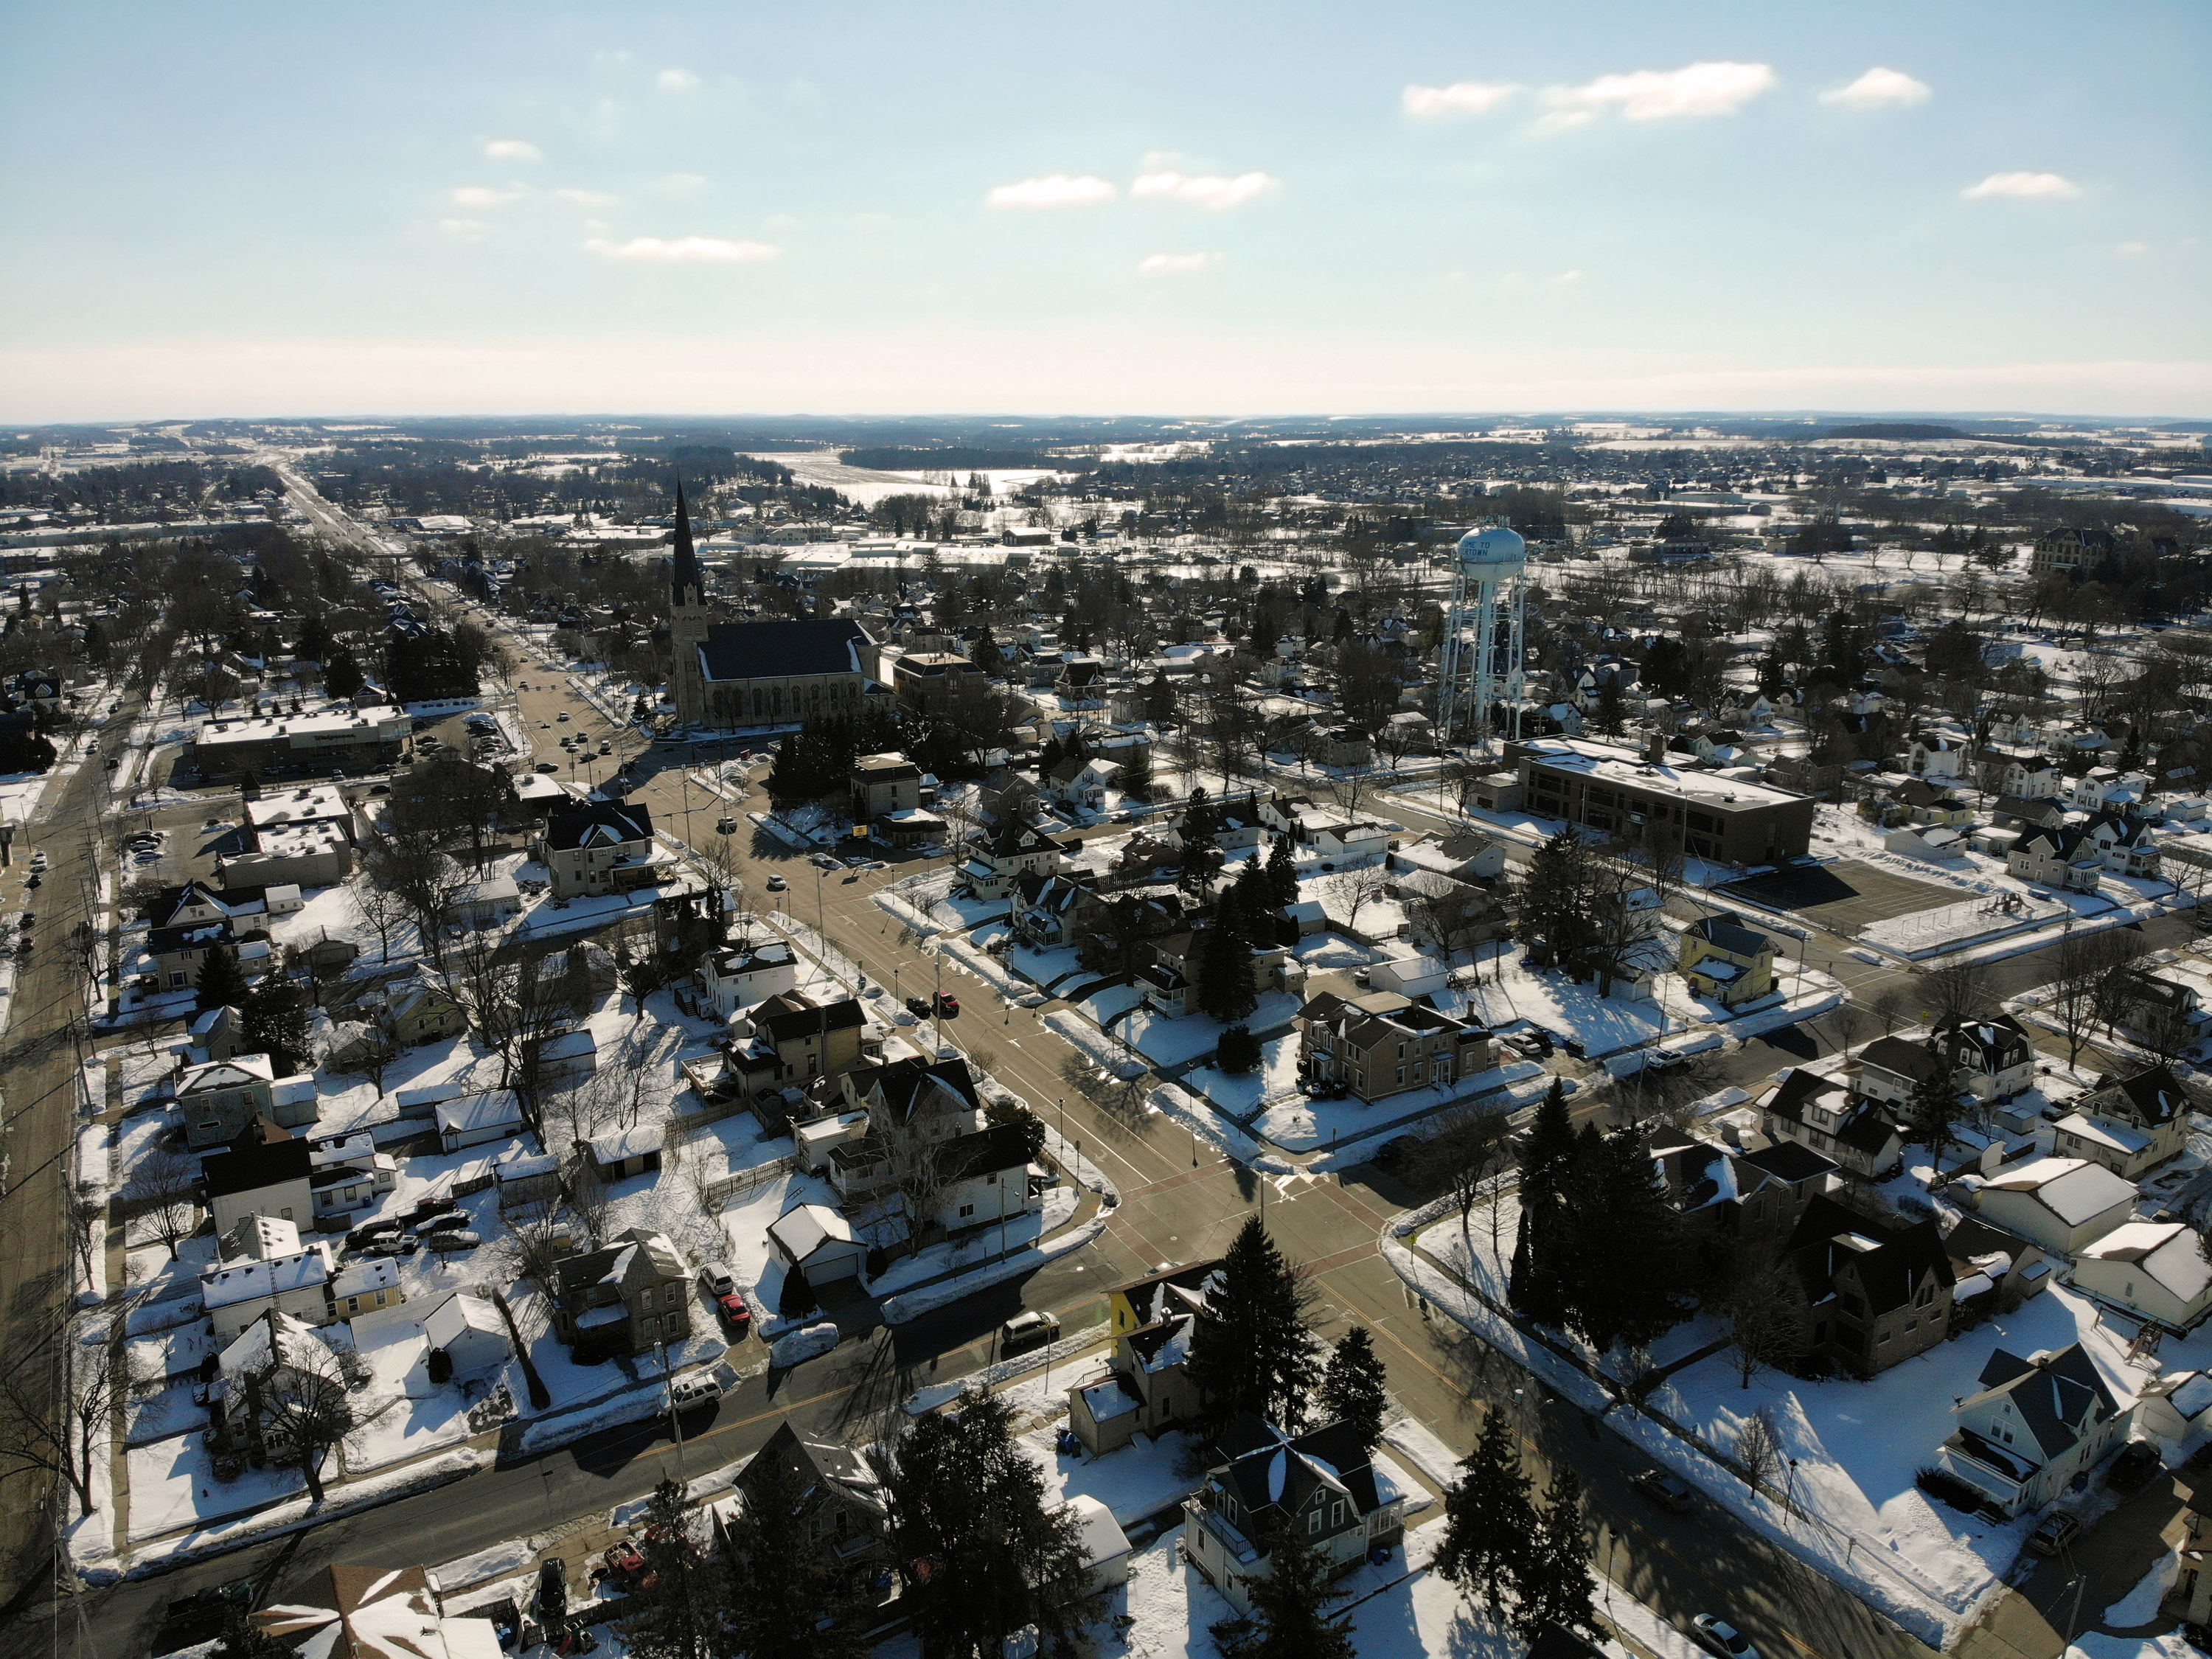 Aerial view of a small Wisconsin town residential neighborhood on a cold, clear day